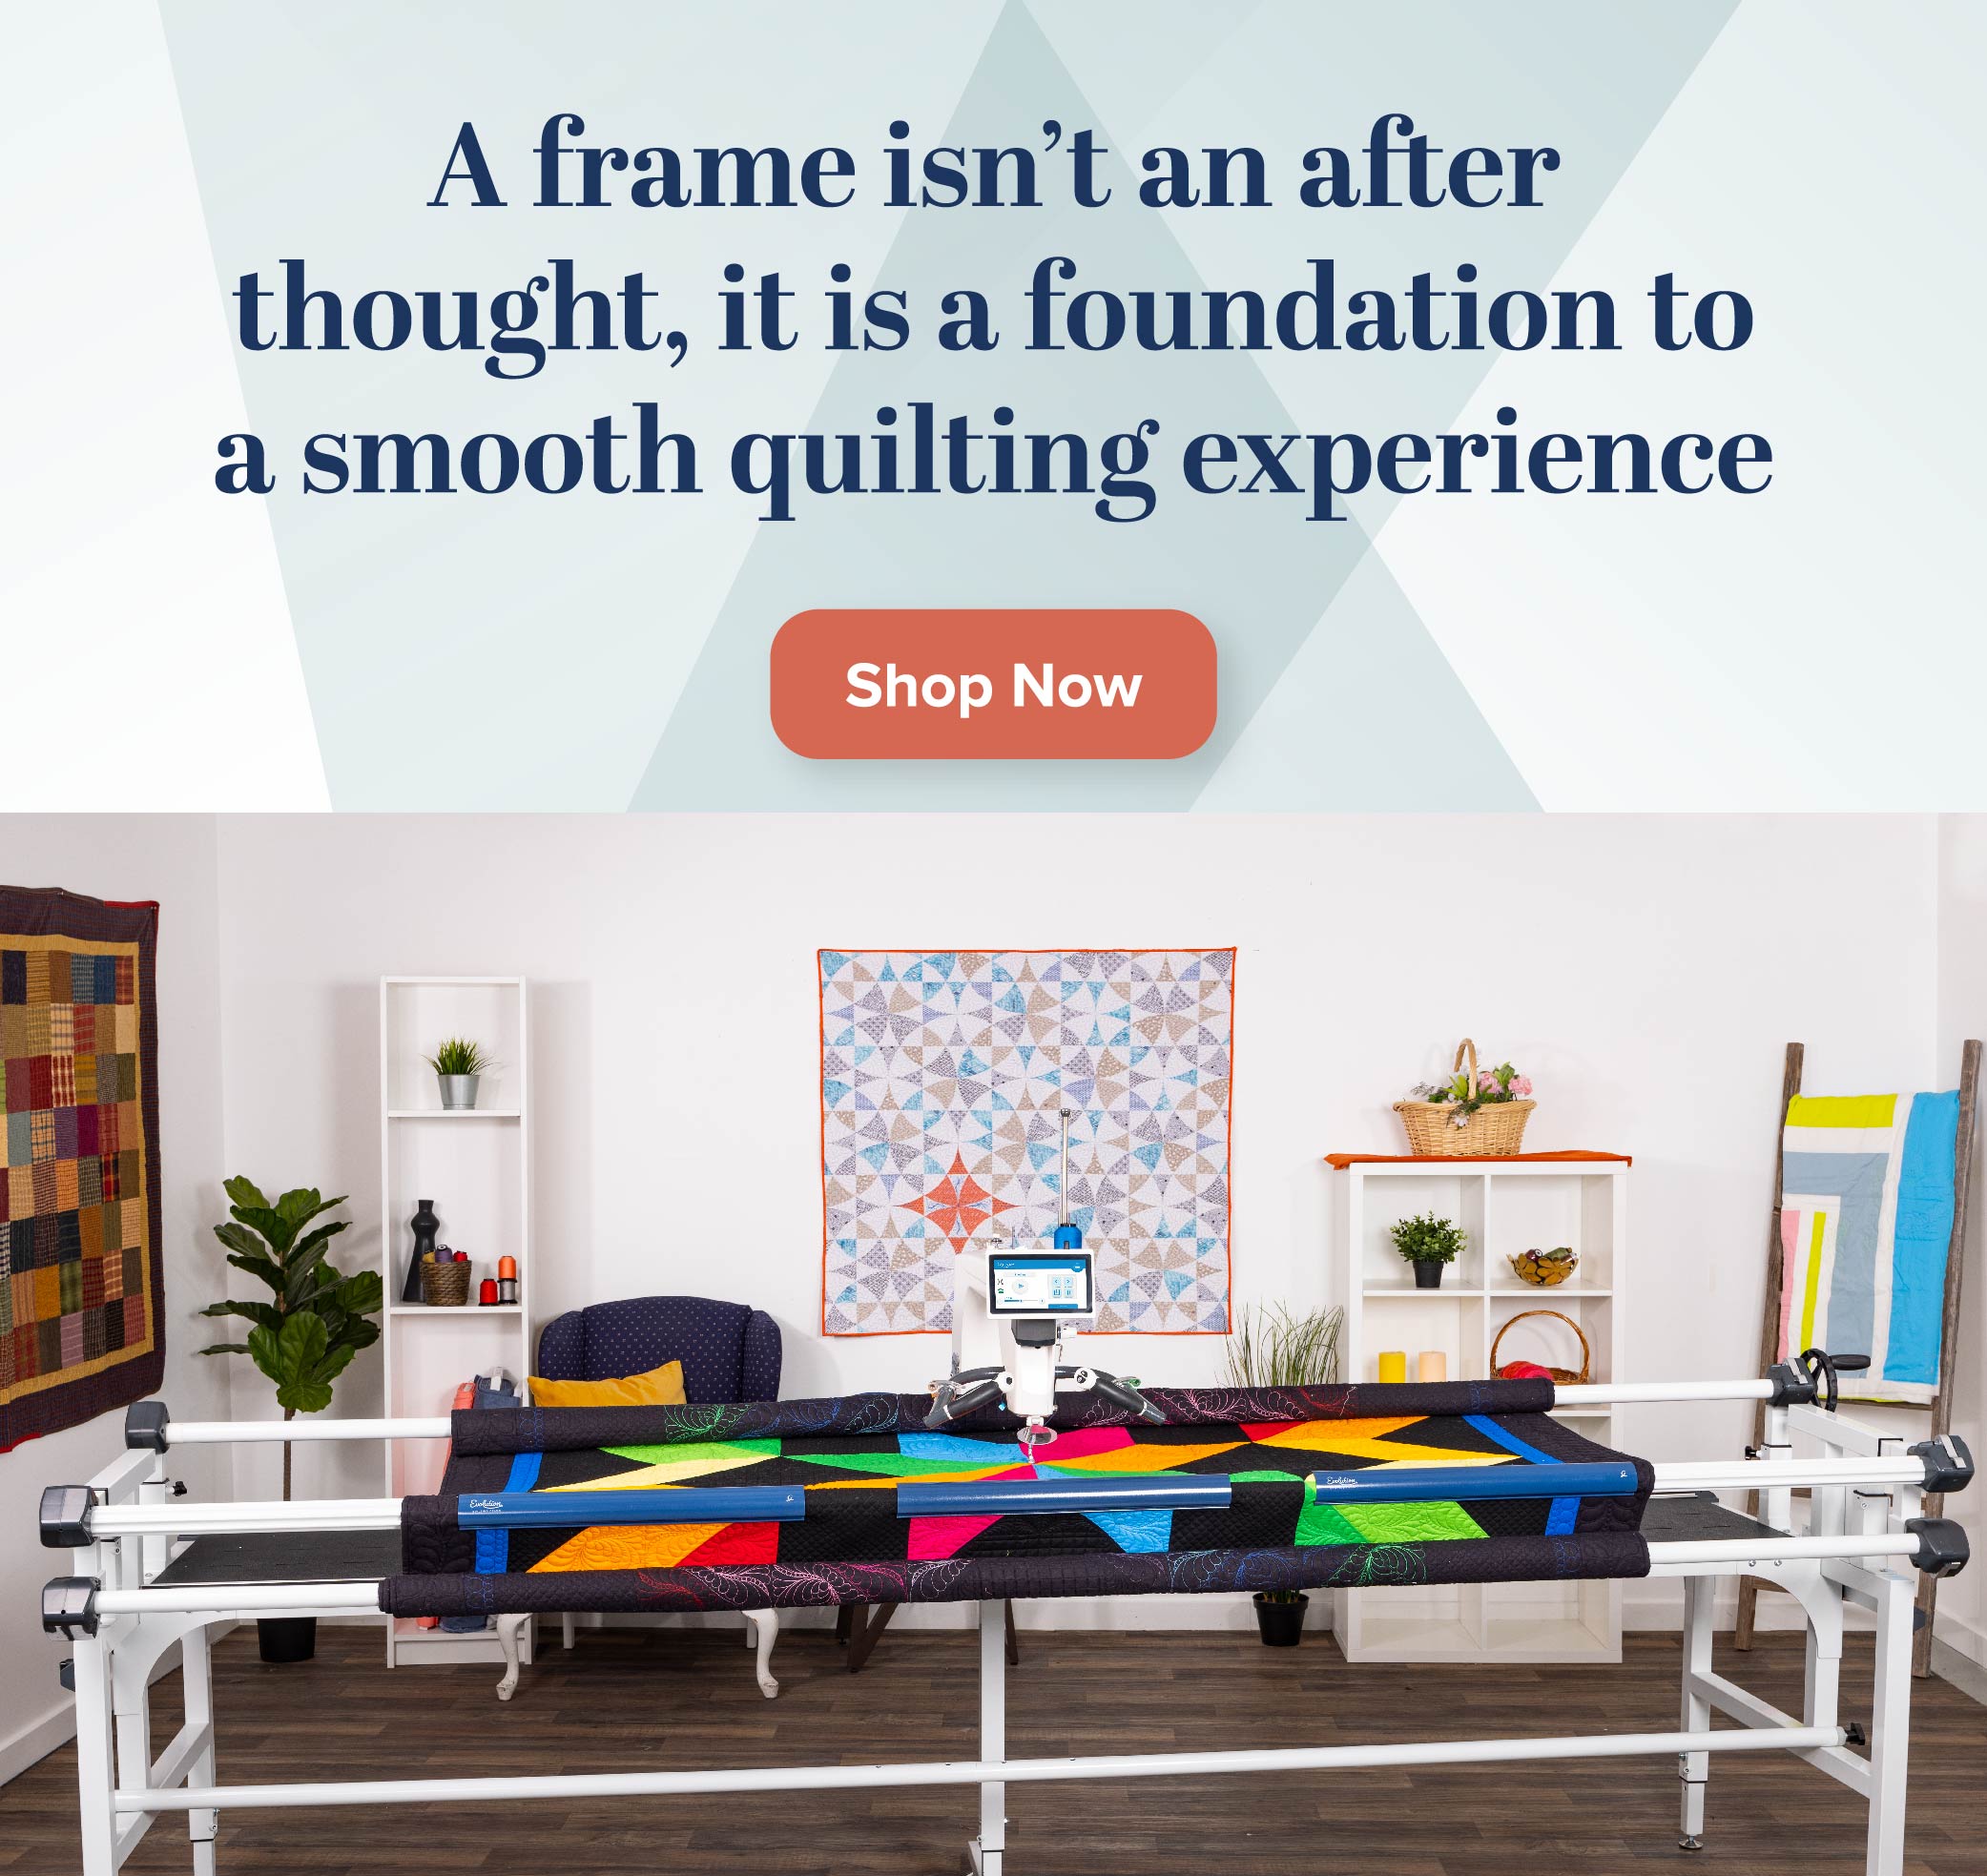 A frame isn't an afterthough, itis a foundation to a smooth quilting experience. Shop now.